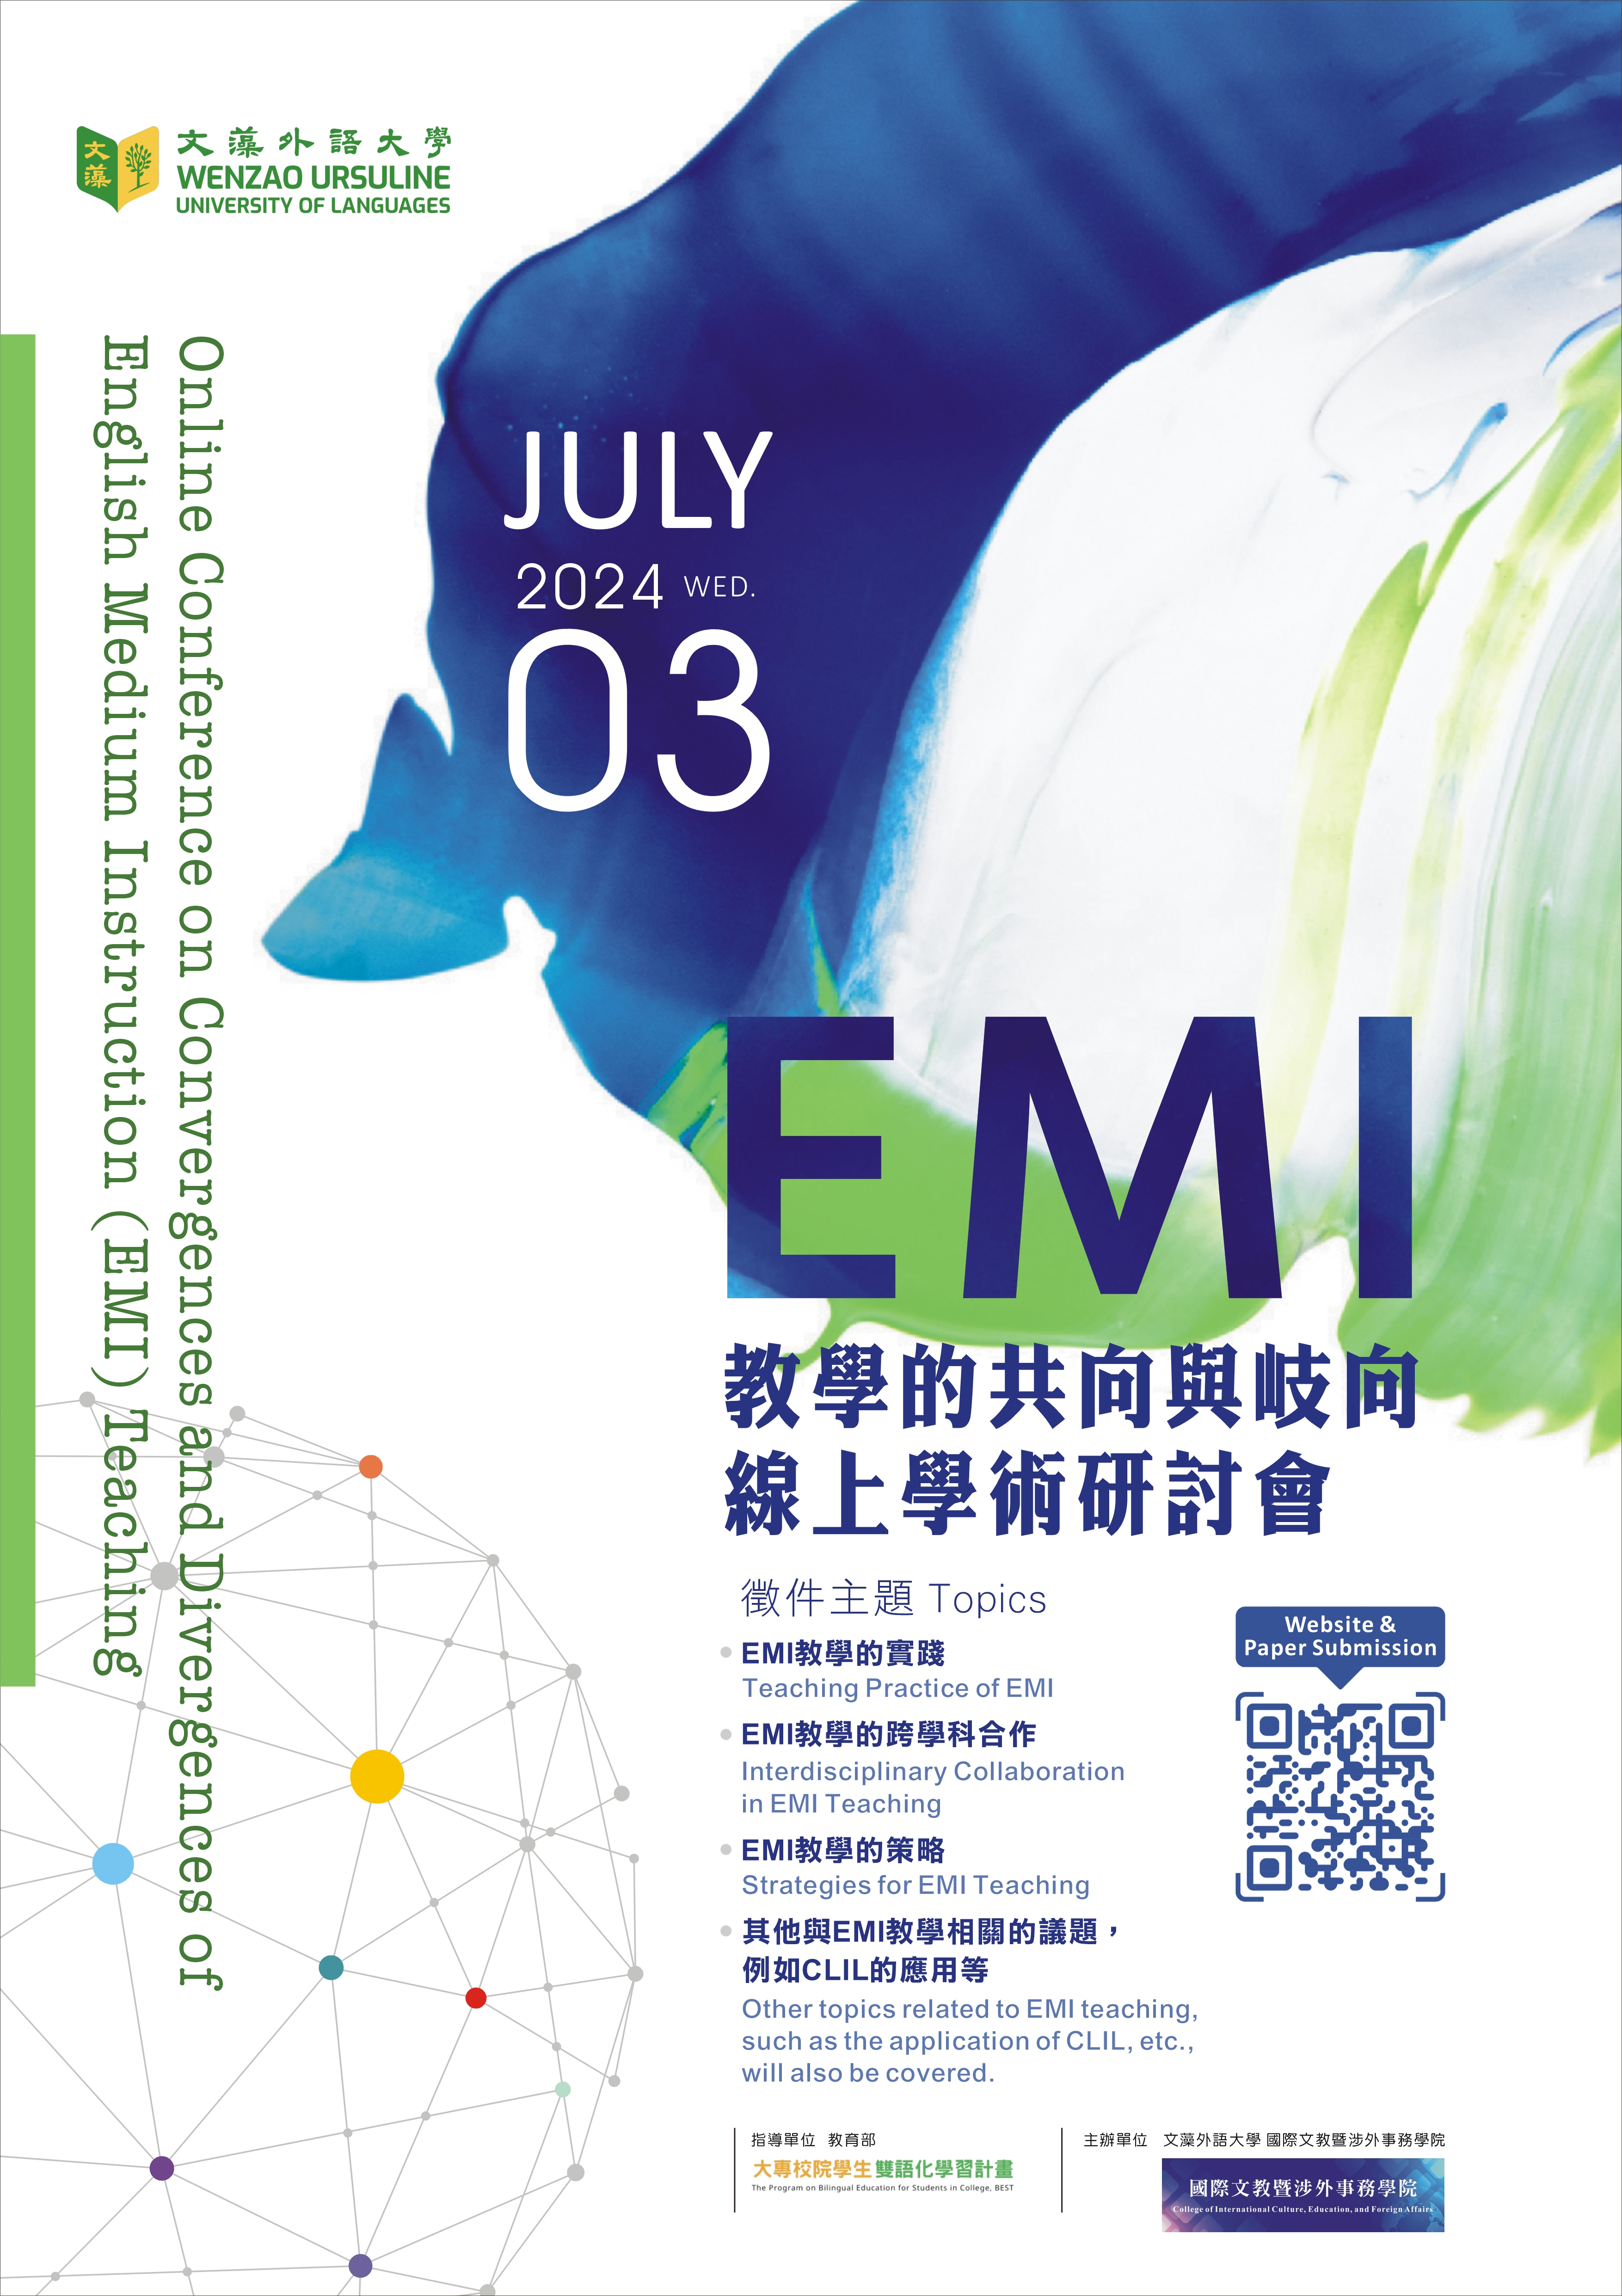 Poster - Online Conference on Convergences and Divergences of English Medium Instruction (EMI) Teaching.jpg